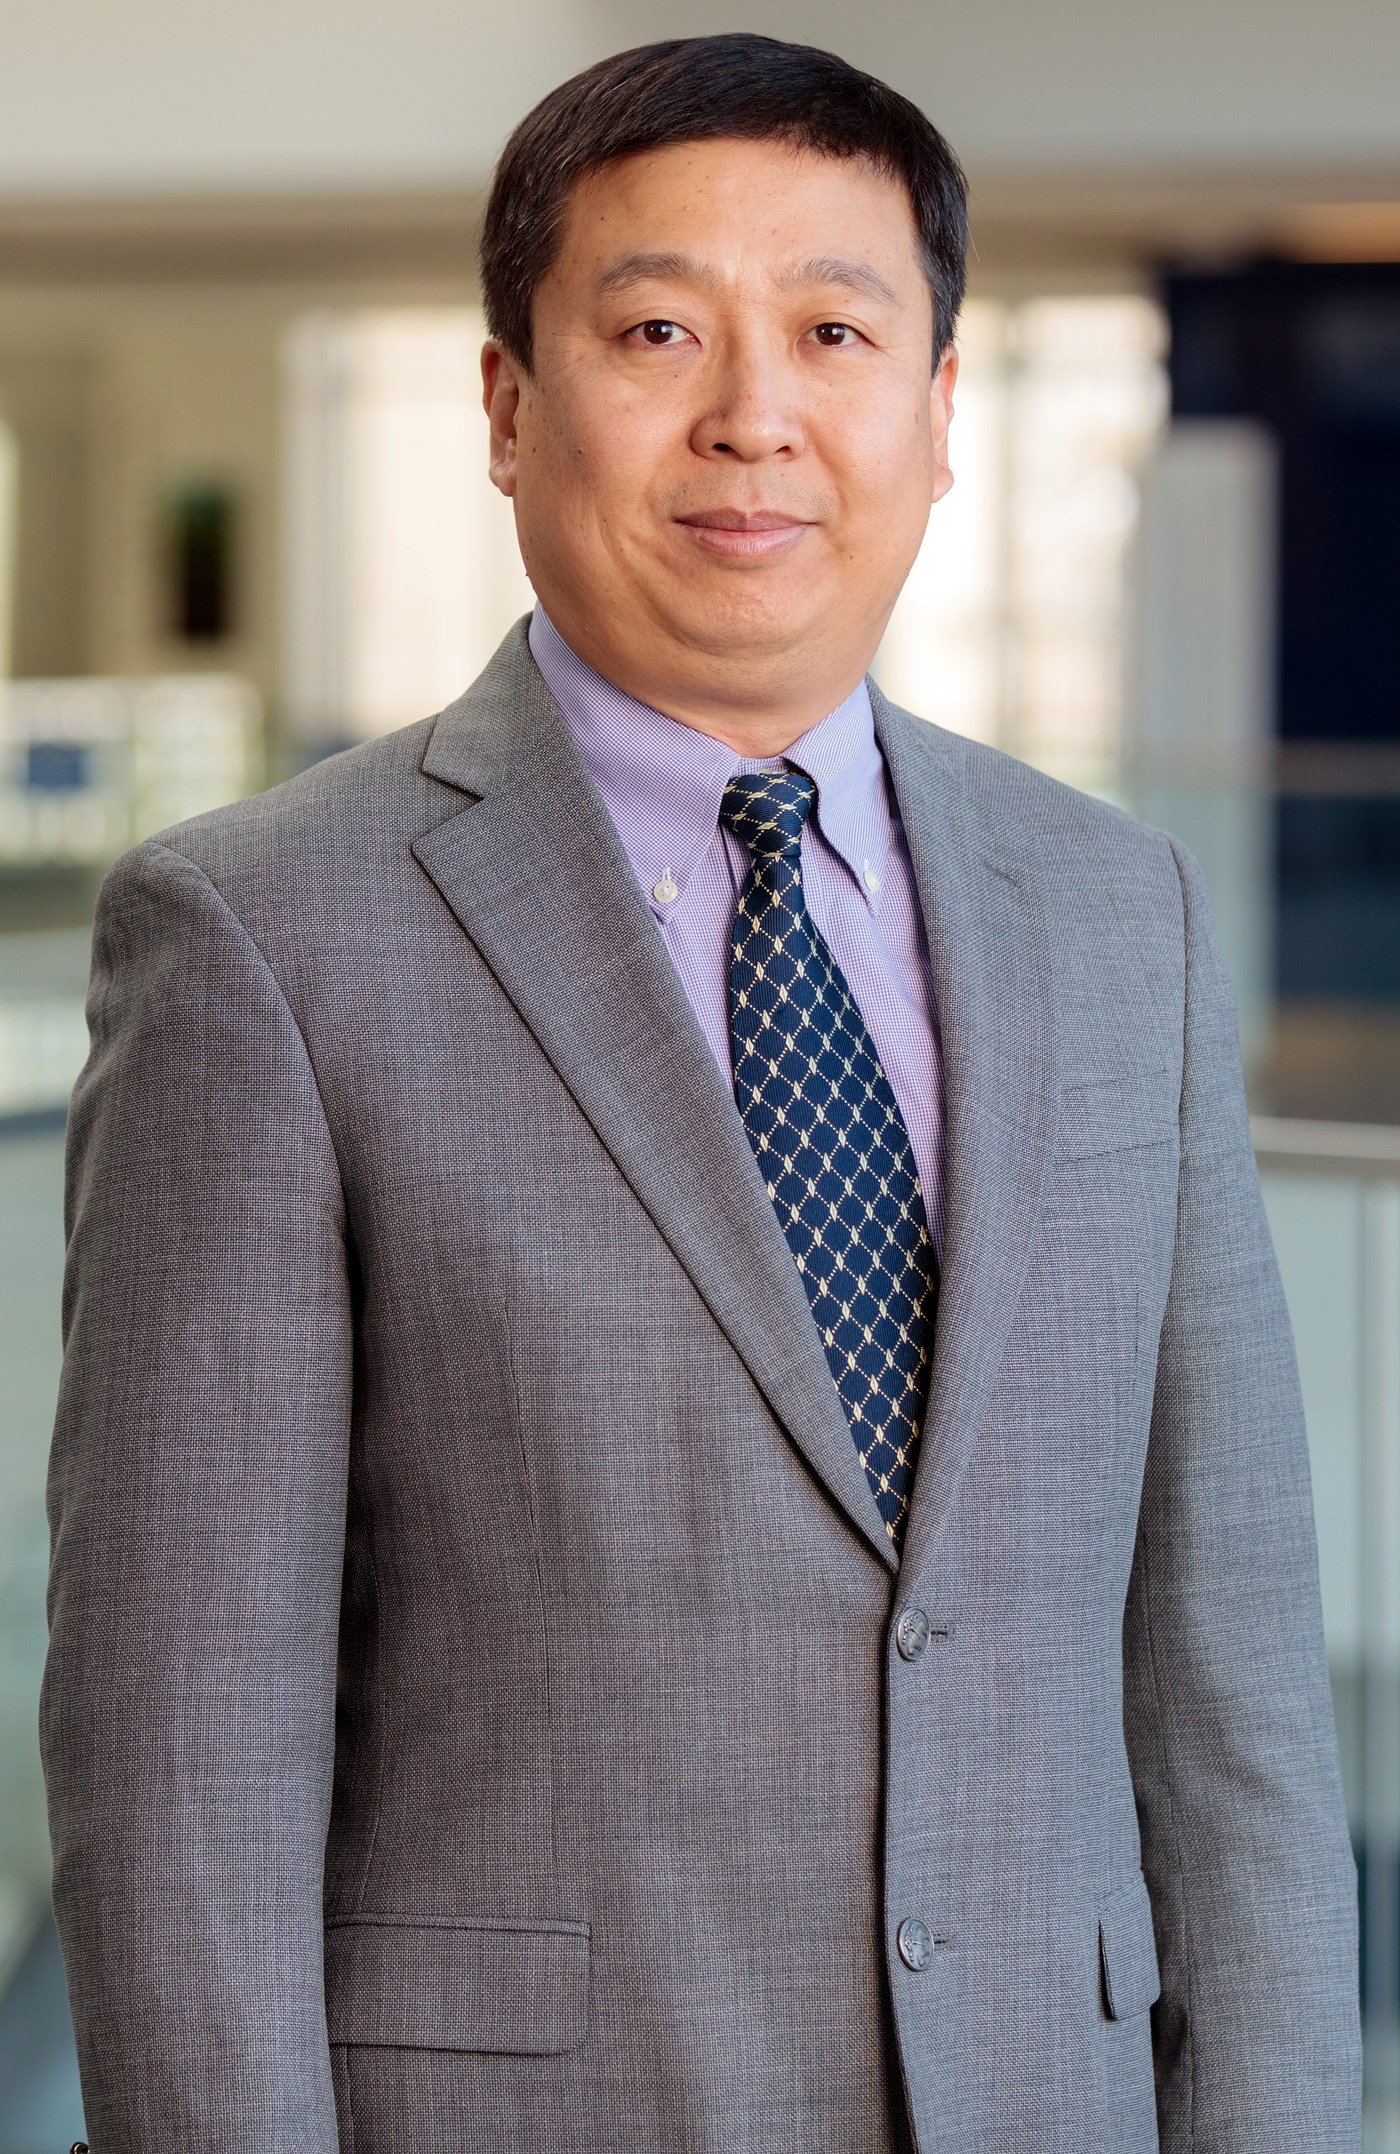 Zhiyong Gu is the Associate Chair for Graduate Studies and a Professor in the Chemical Engineering Department at UMass Lowell.